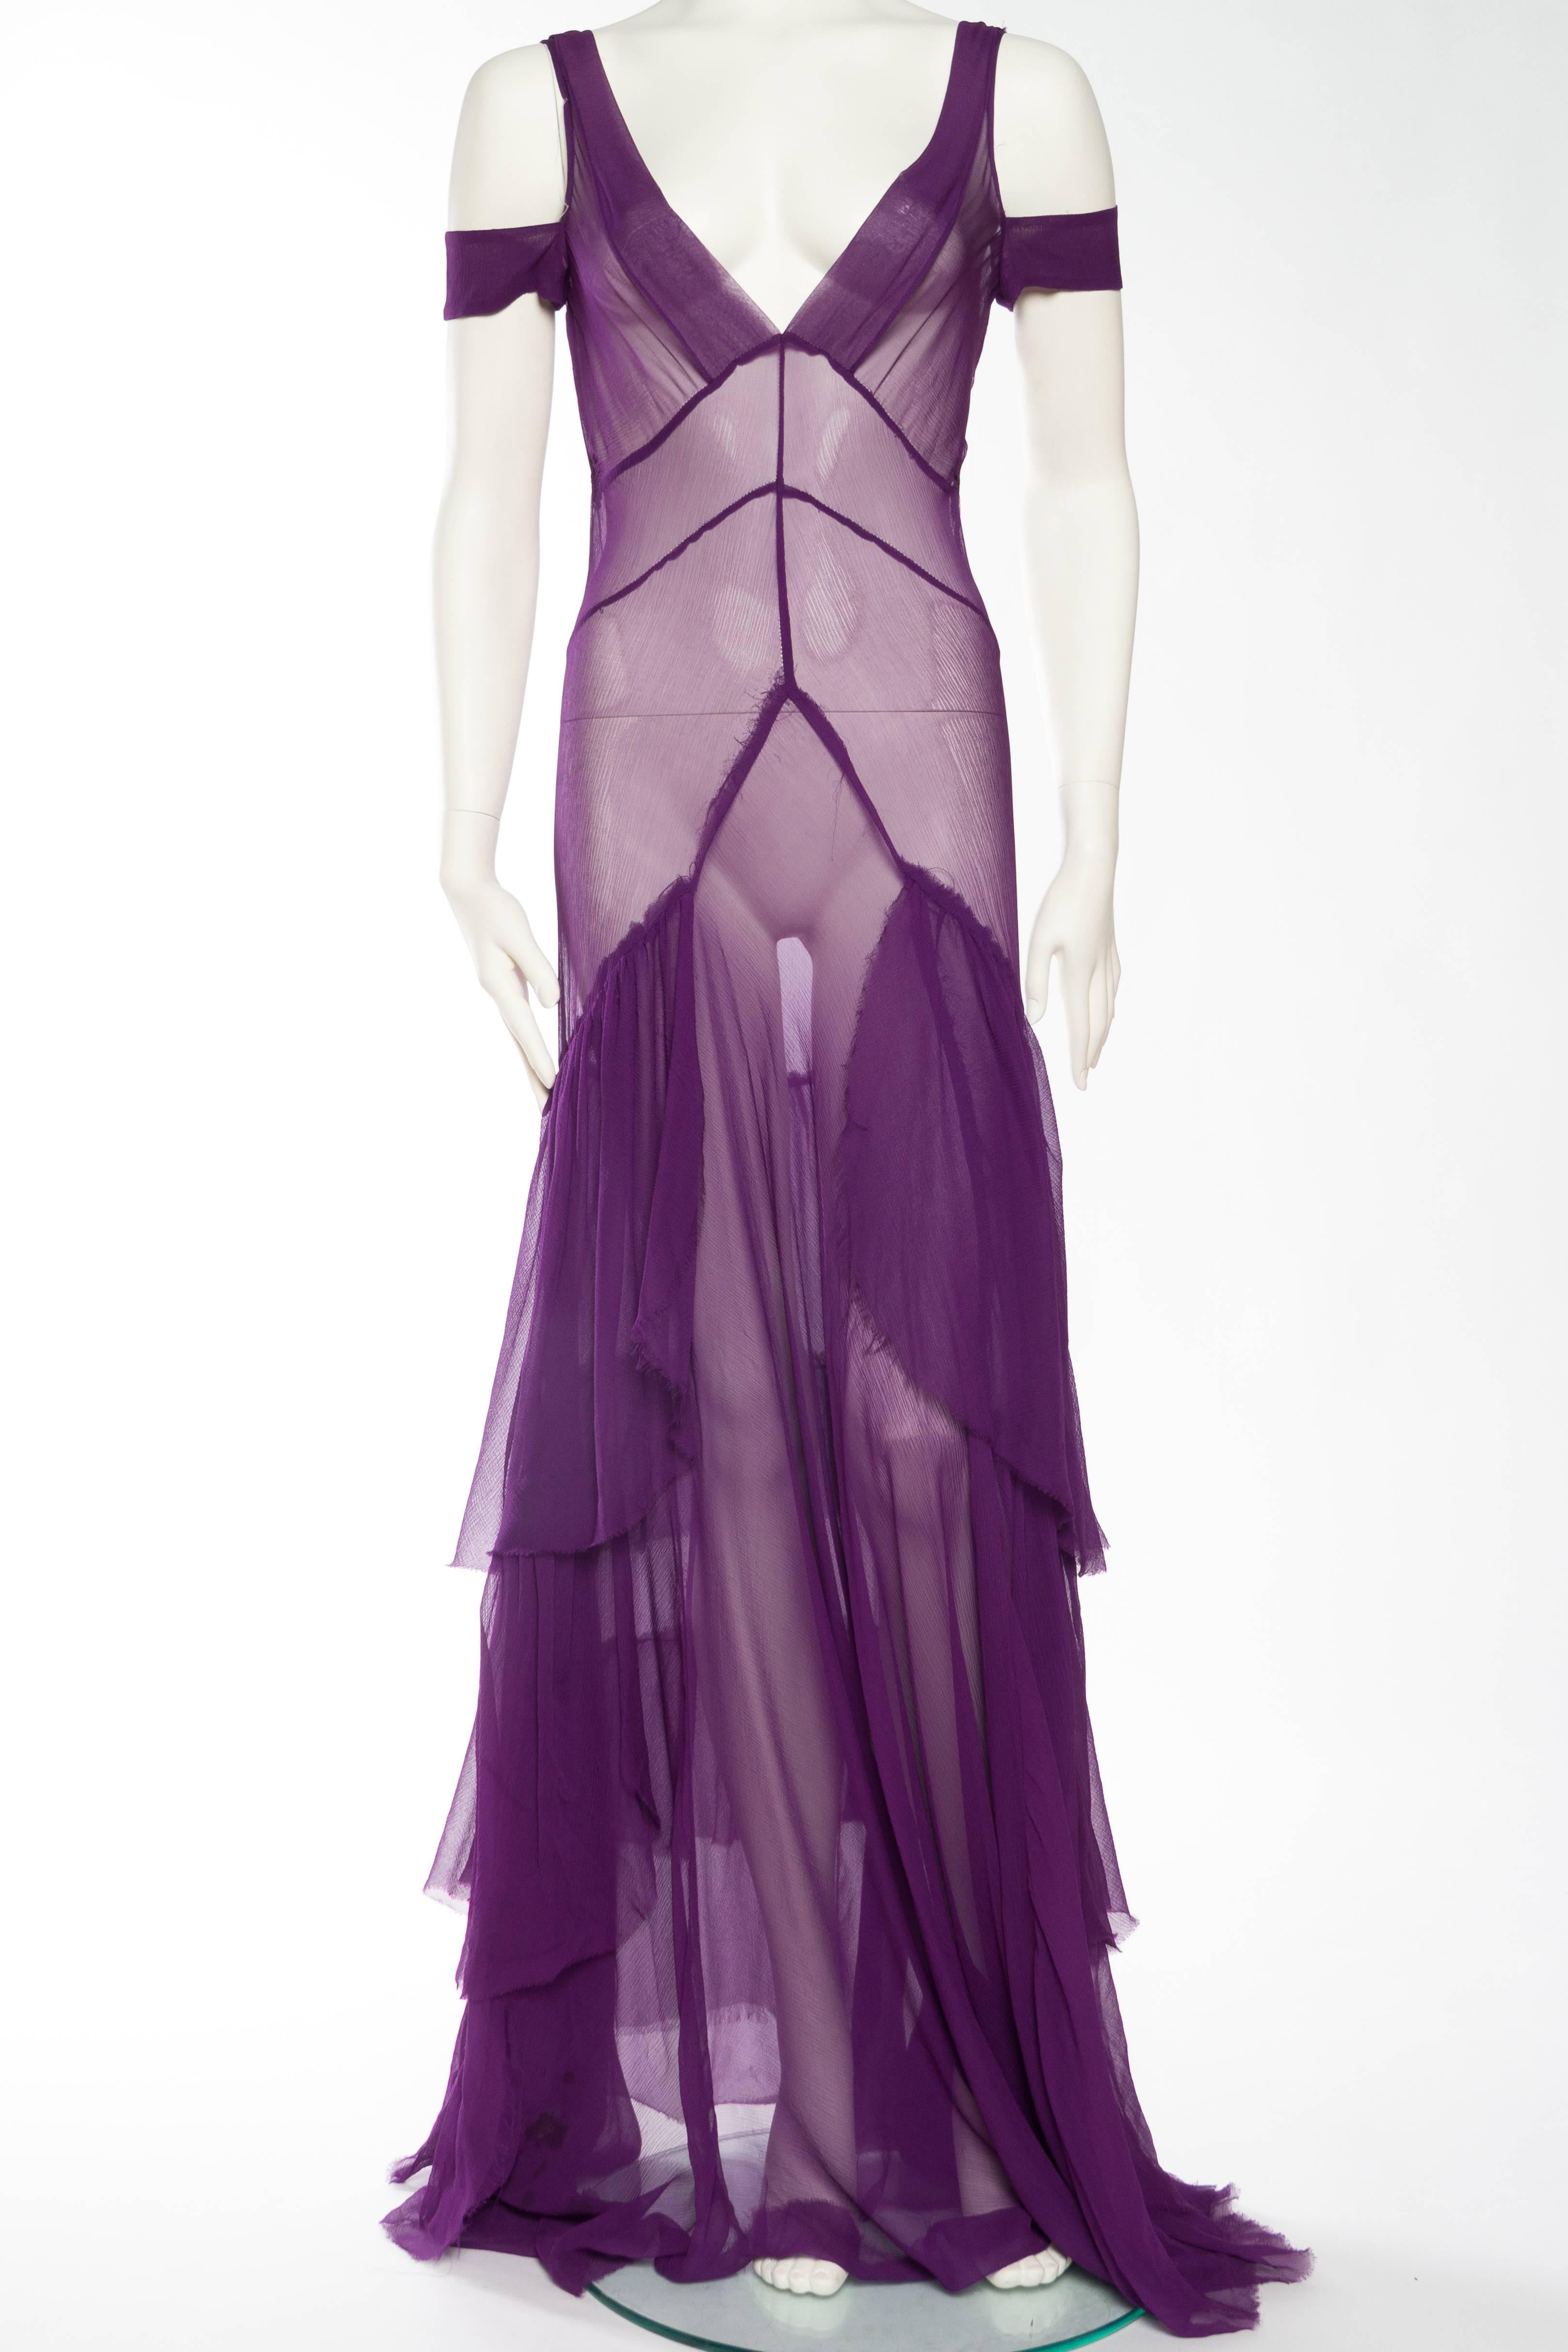 From the 1990s with raw hems in the style of Alberta Ferretti and Alexander McQueen however this dress has no label. 